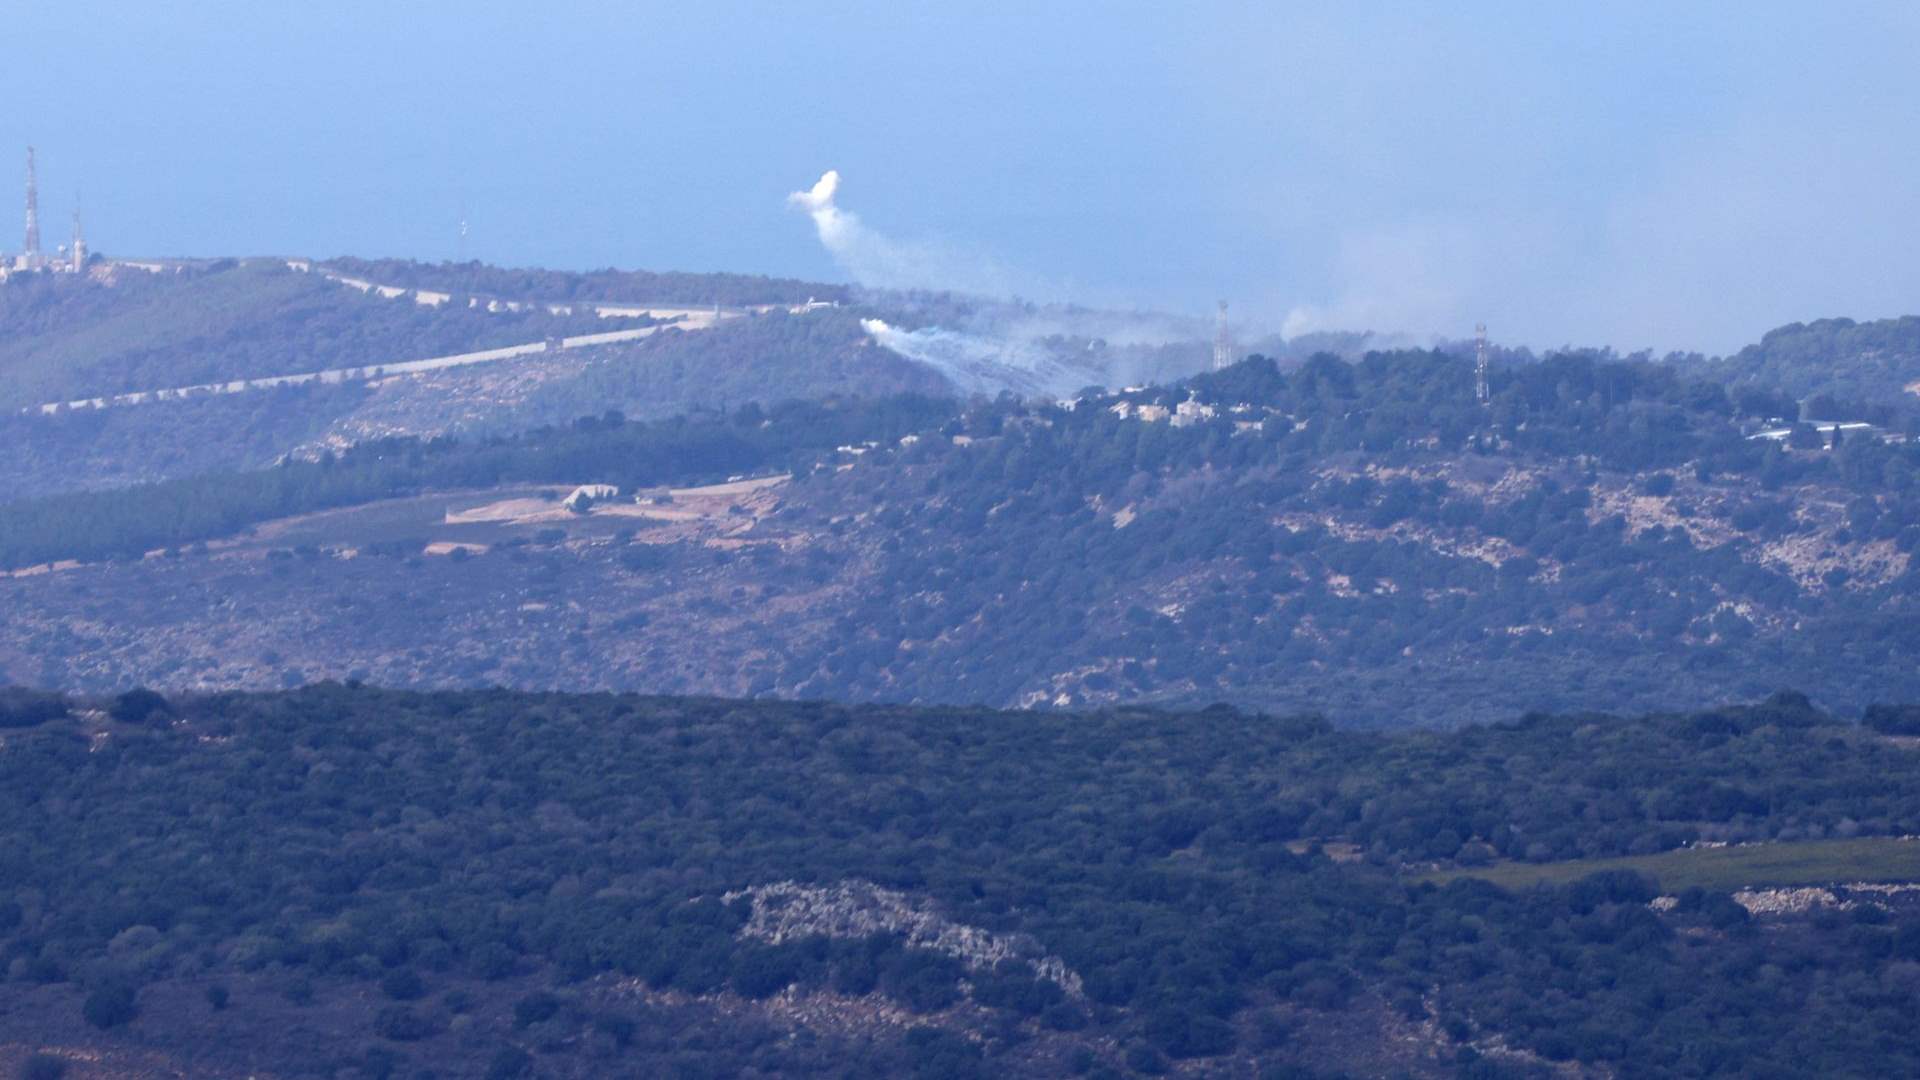 Israeli media: 50 missiles fired at Upper Galilee settlements from Lebanon in &#39;largest shelling since war beginning&#39;